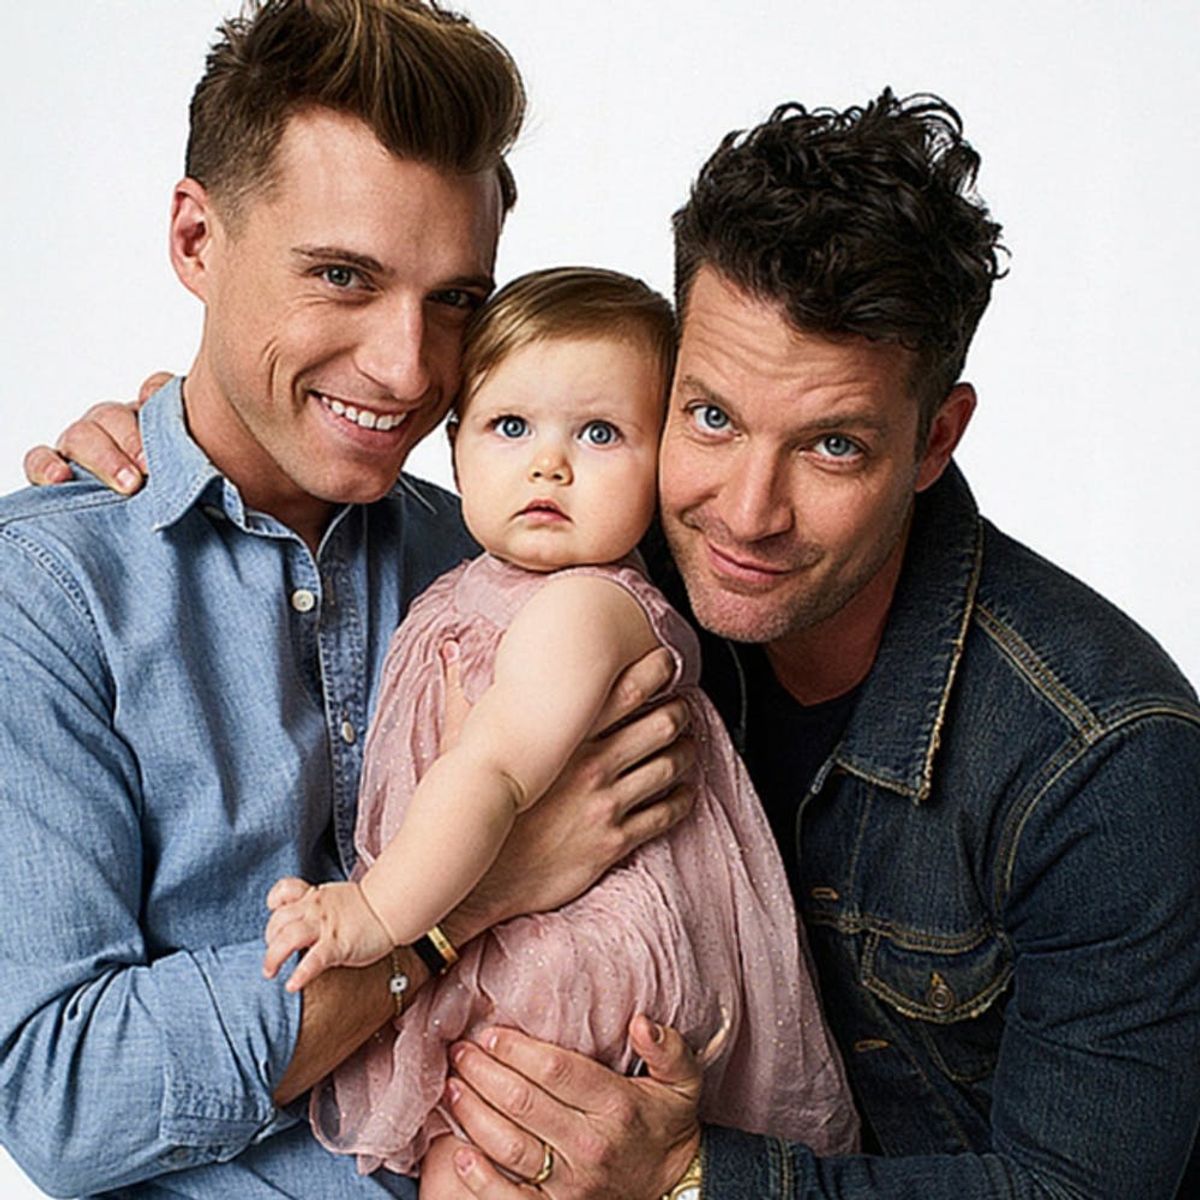 Not Sure What to Get Dad for Father’s Day? We Asked Nate Berkus for His Advice